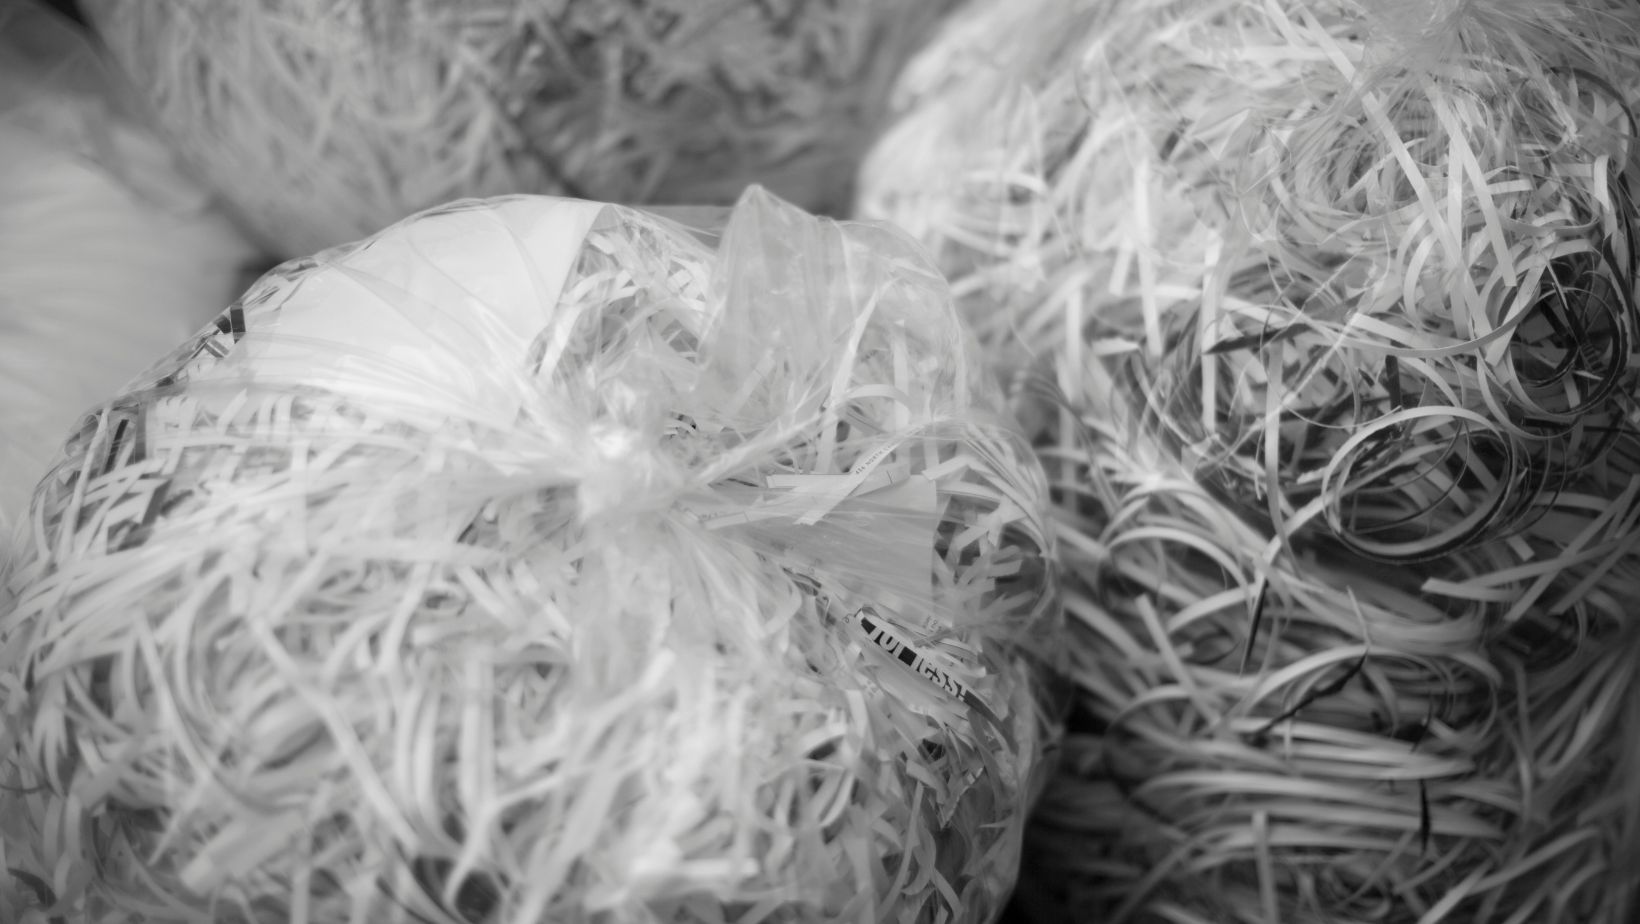 Clear plastic bags of shredded paper